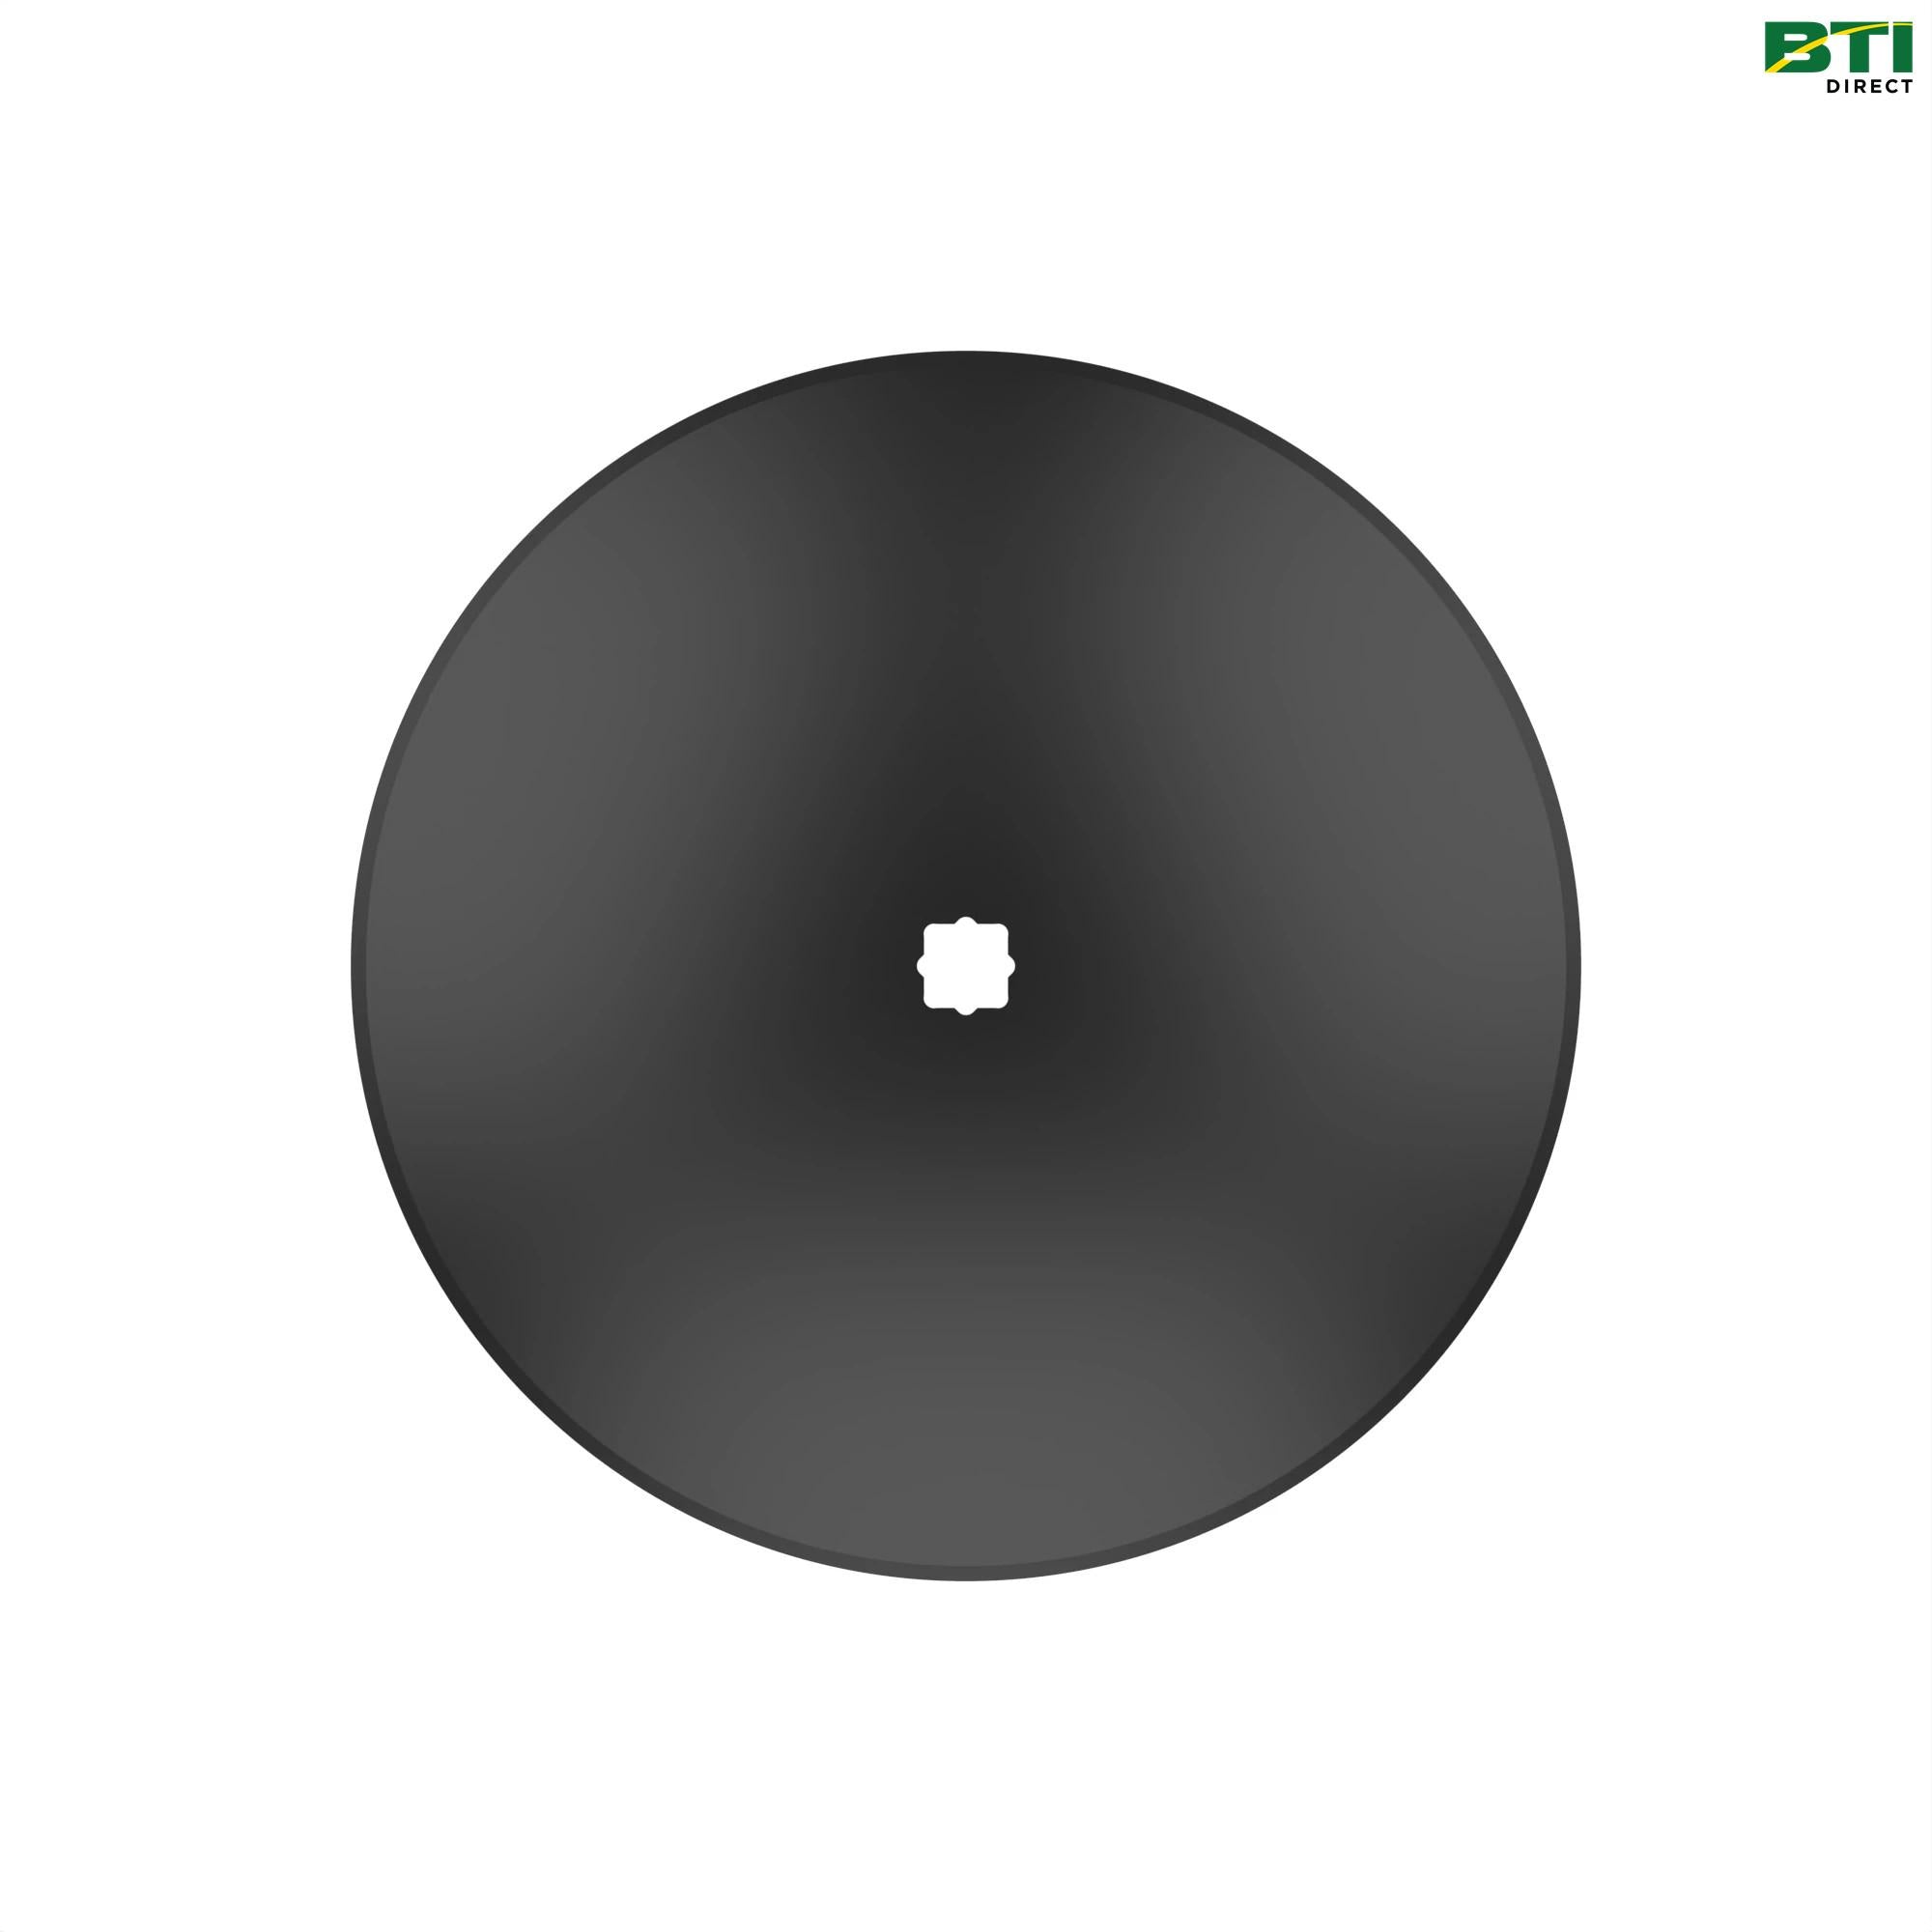 A47237: Solid Spherical Disk